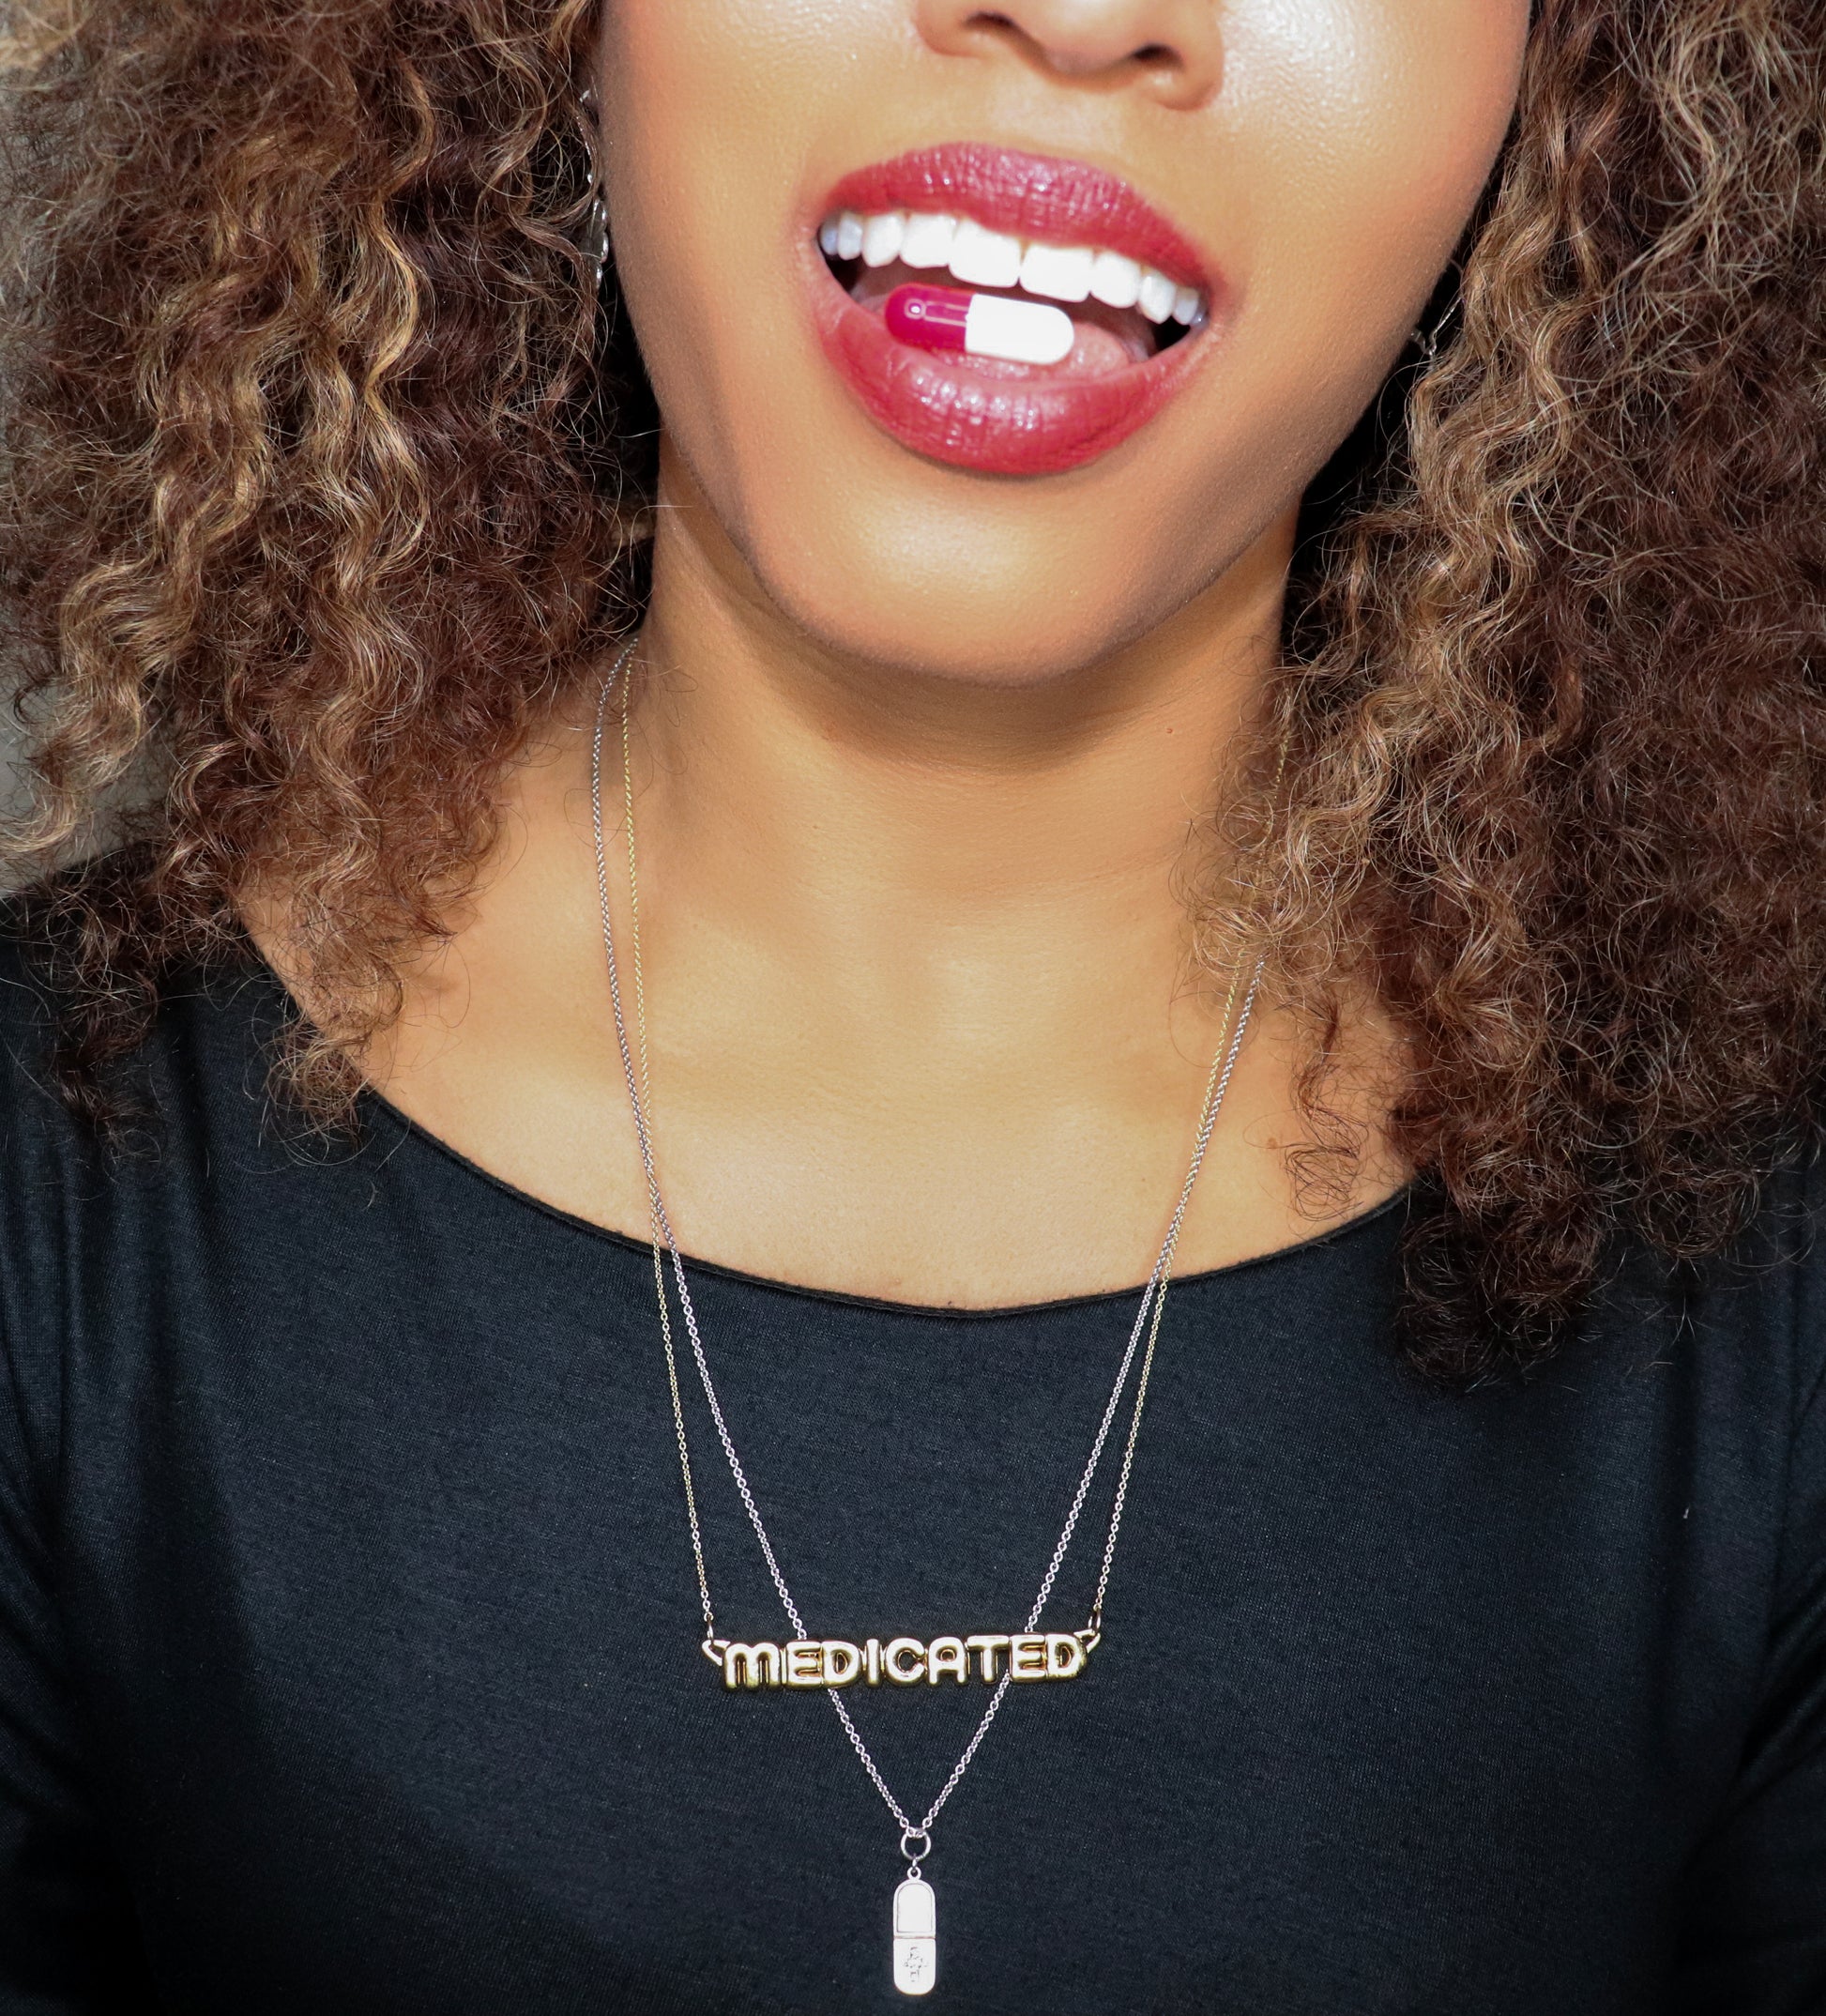 black woman with curly hair in a black dress with pill in her mouth wearing a necklace that says medicated from the wandering jewel